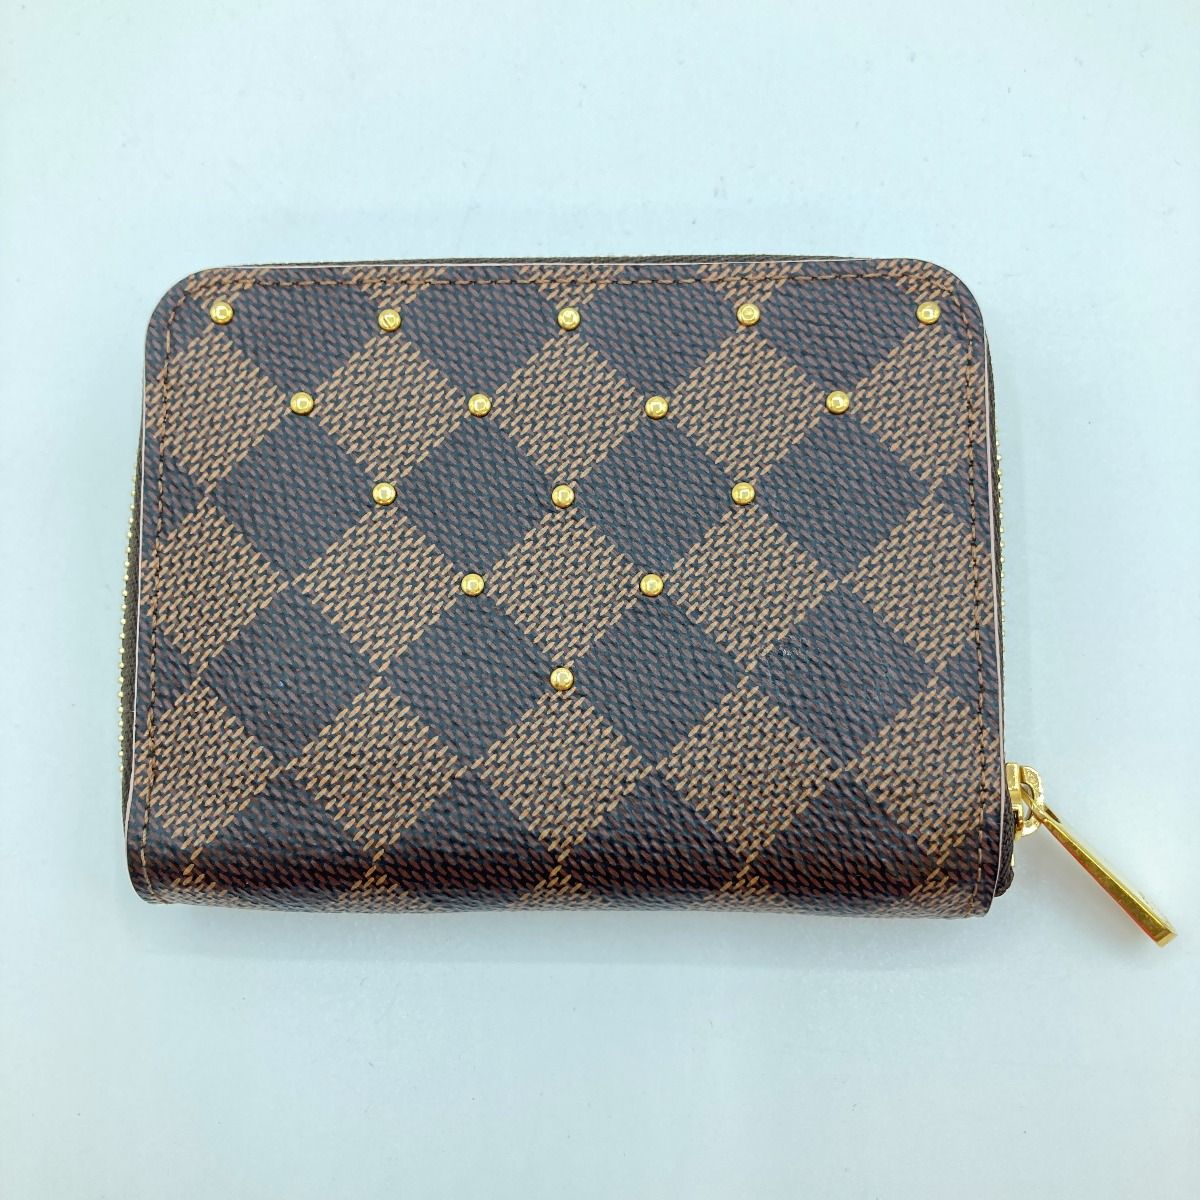 ◎◎LOUIS VUITTON ルイヴィトン ダミエ ジッピーコインパース ...